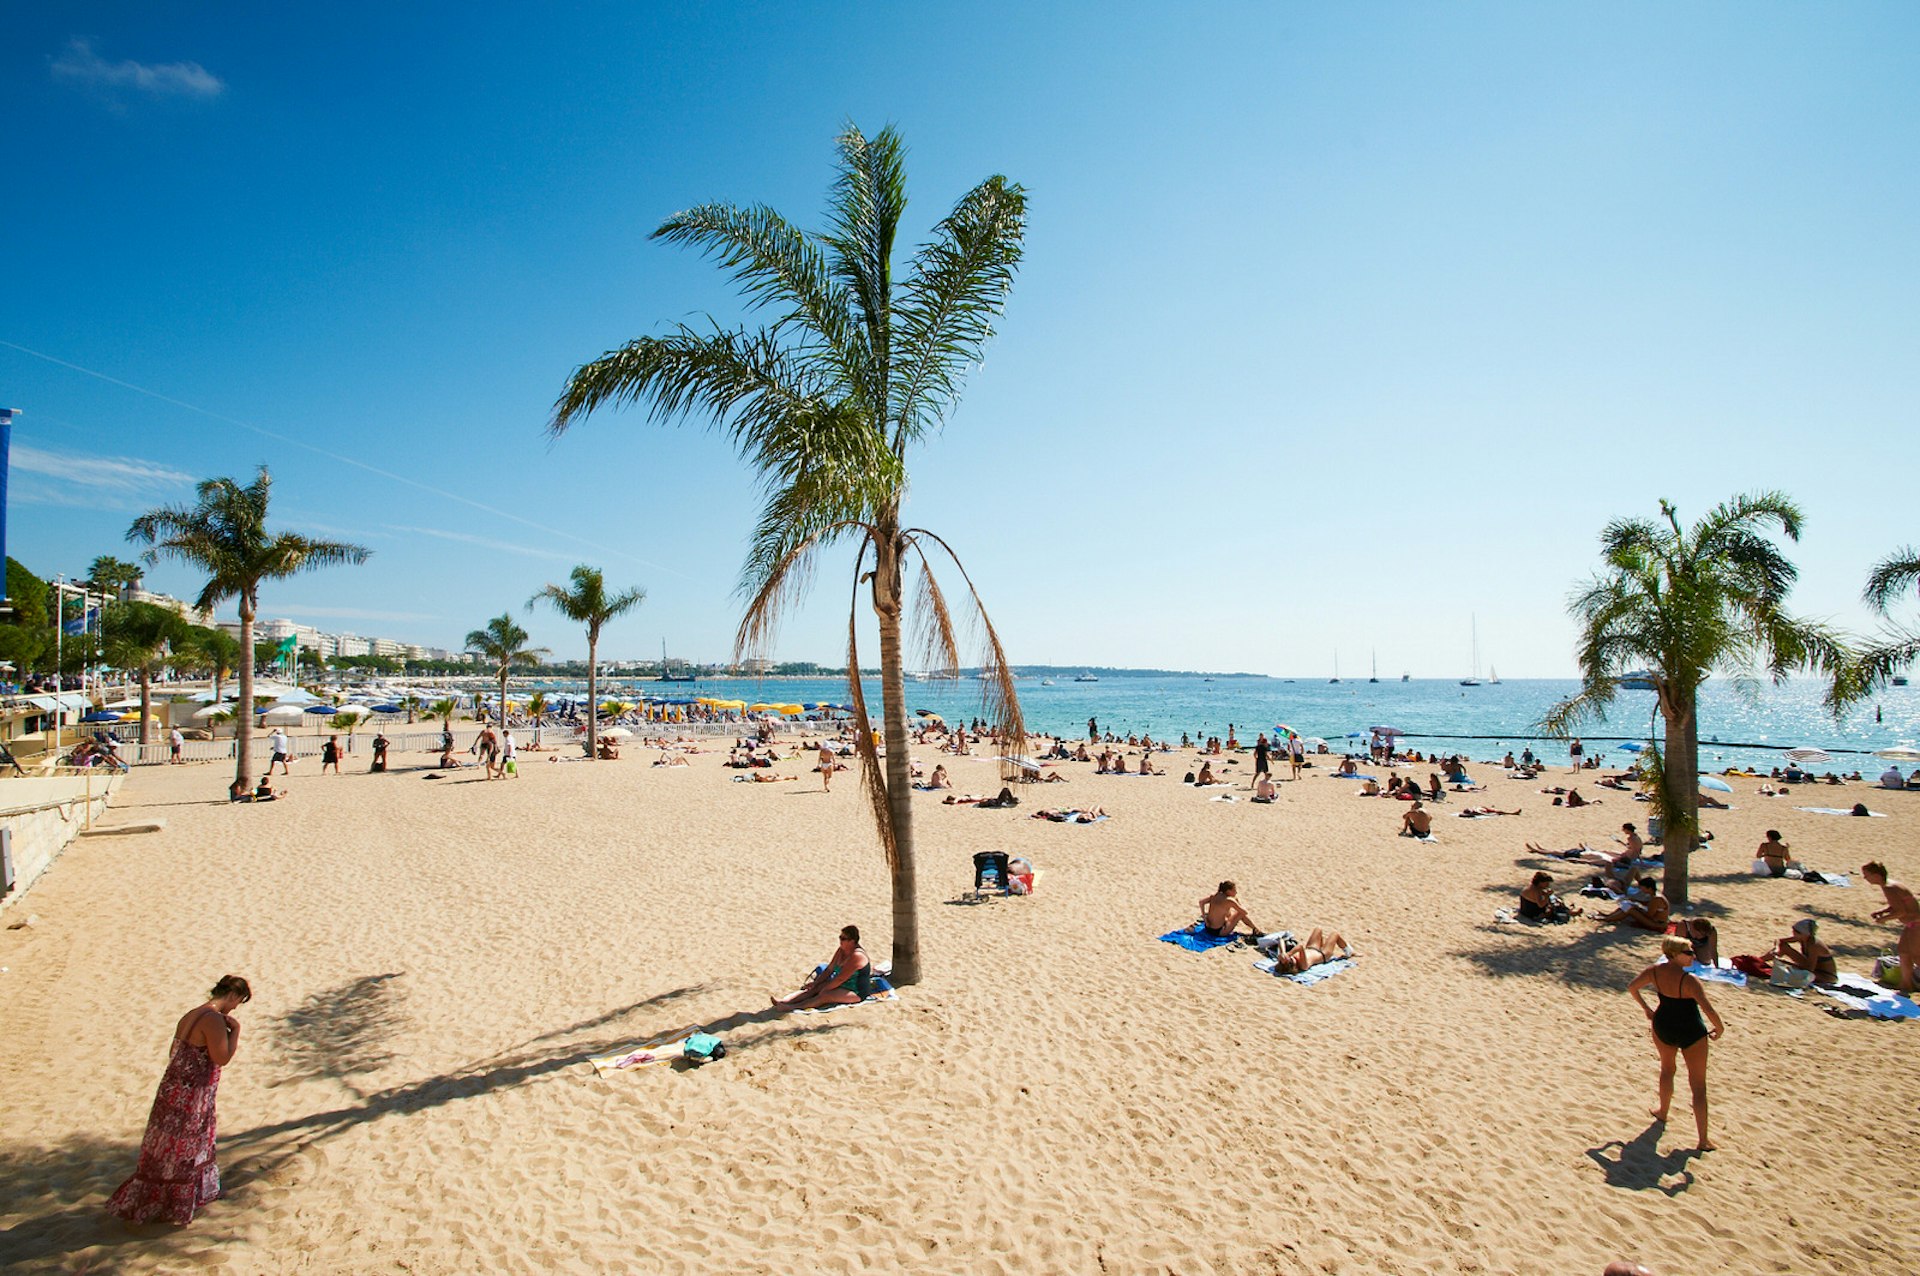 Bright blue sea and skies at a beach at Barcelona, where sunbathers are lying on golden sand studded with palm trees